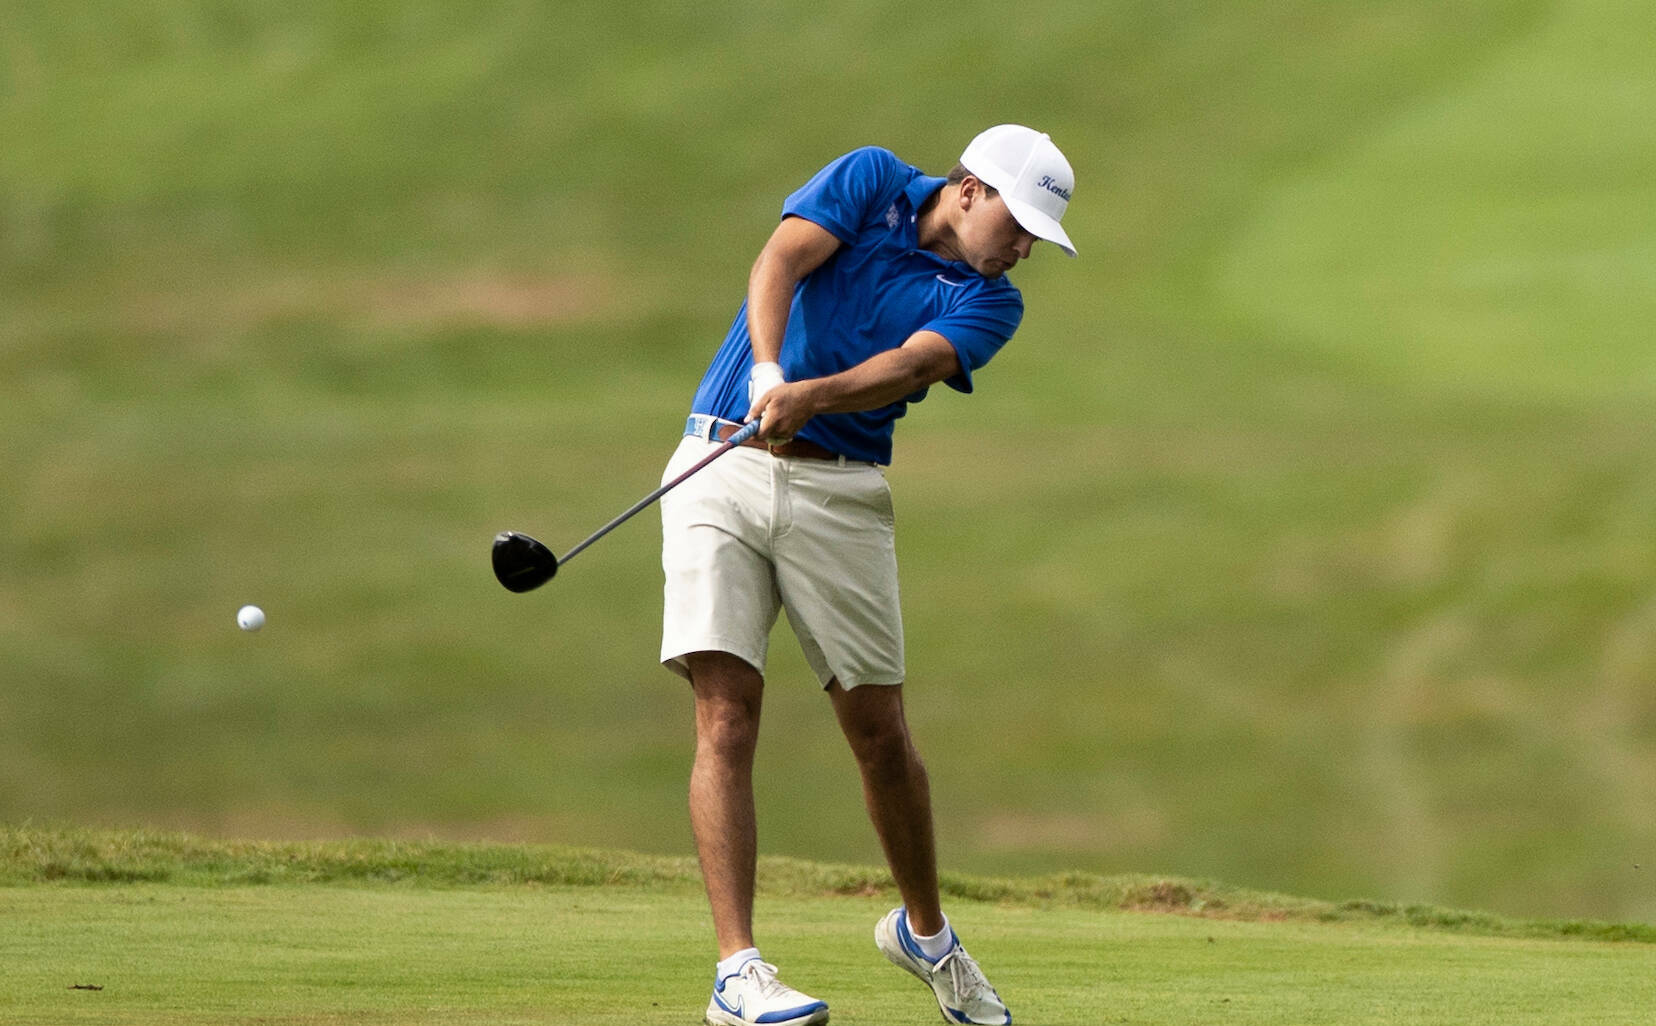 Cats Tied for 12th, Alex Goff Tied for Eighth after First Day of SEC Match Play